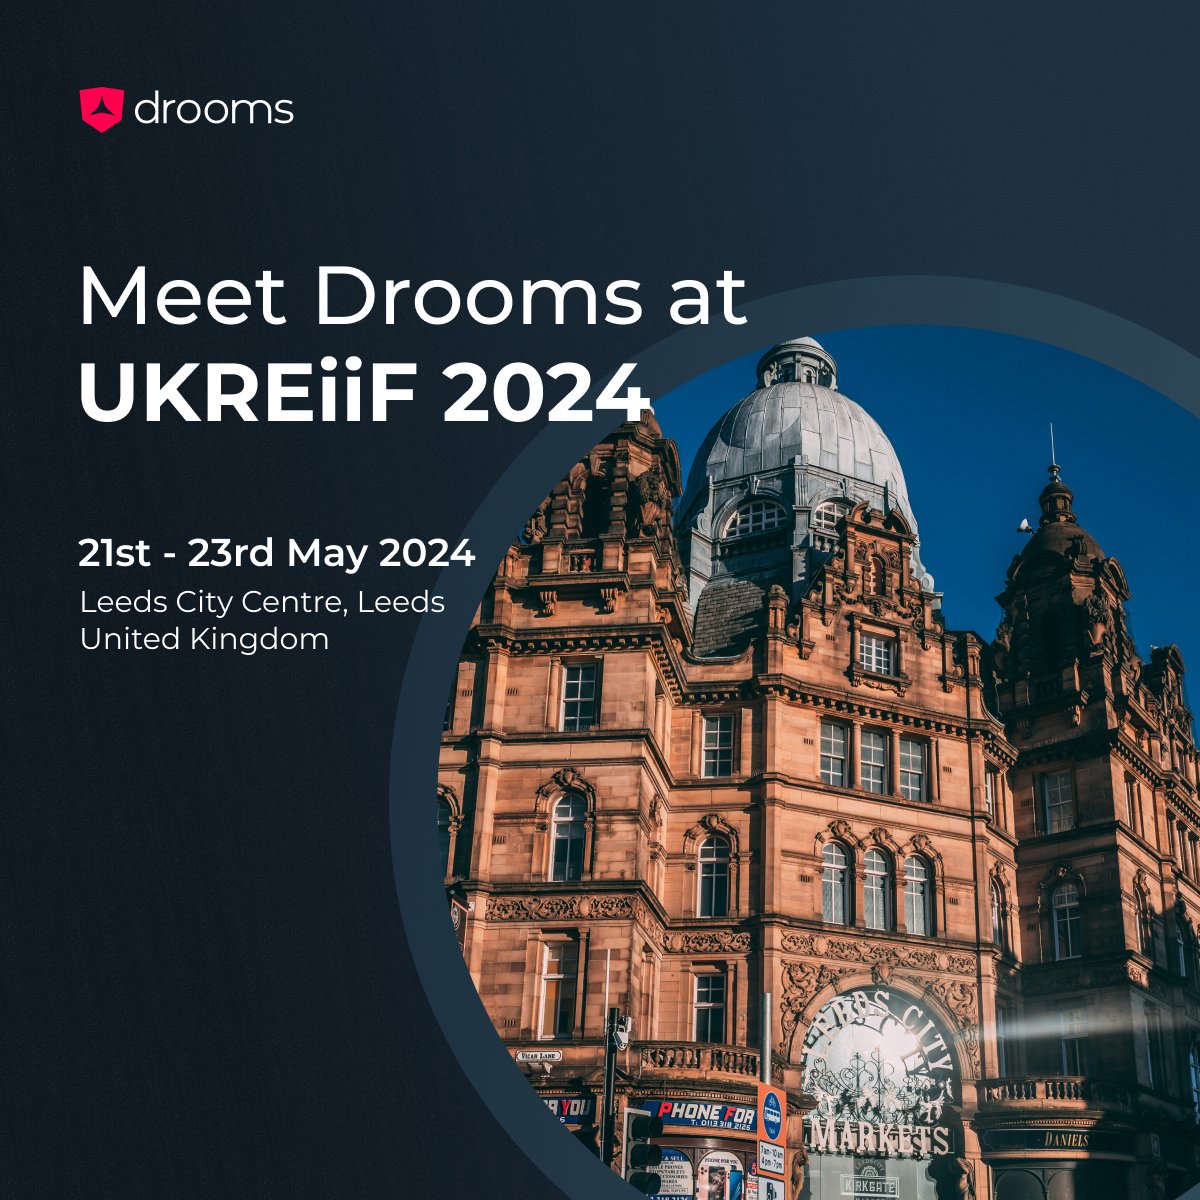 We are delighted to be back again this year at #UKREiiF in Leeds!  

Meet Andrew Jordan and Luke Buckingham onsite and discover how Drooms can speed-up your time to transaction. Send them a short message on LinkedIn to schedule a catch-up with our experts onsite.